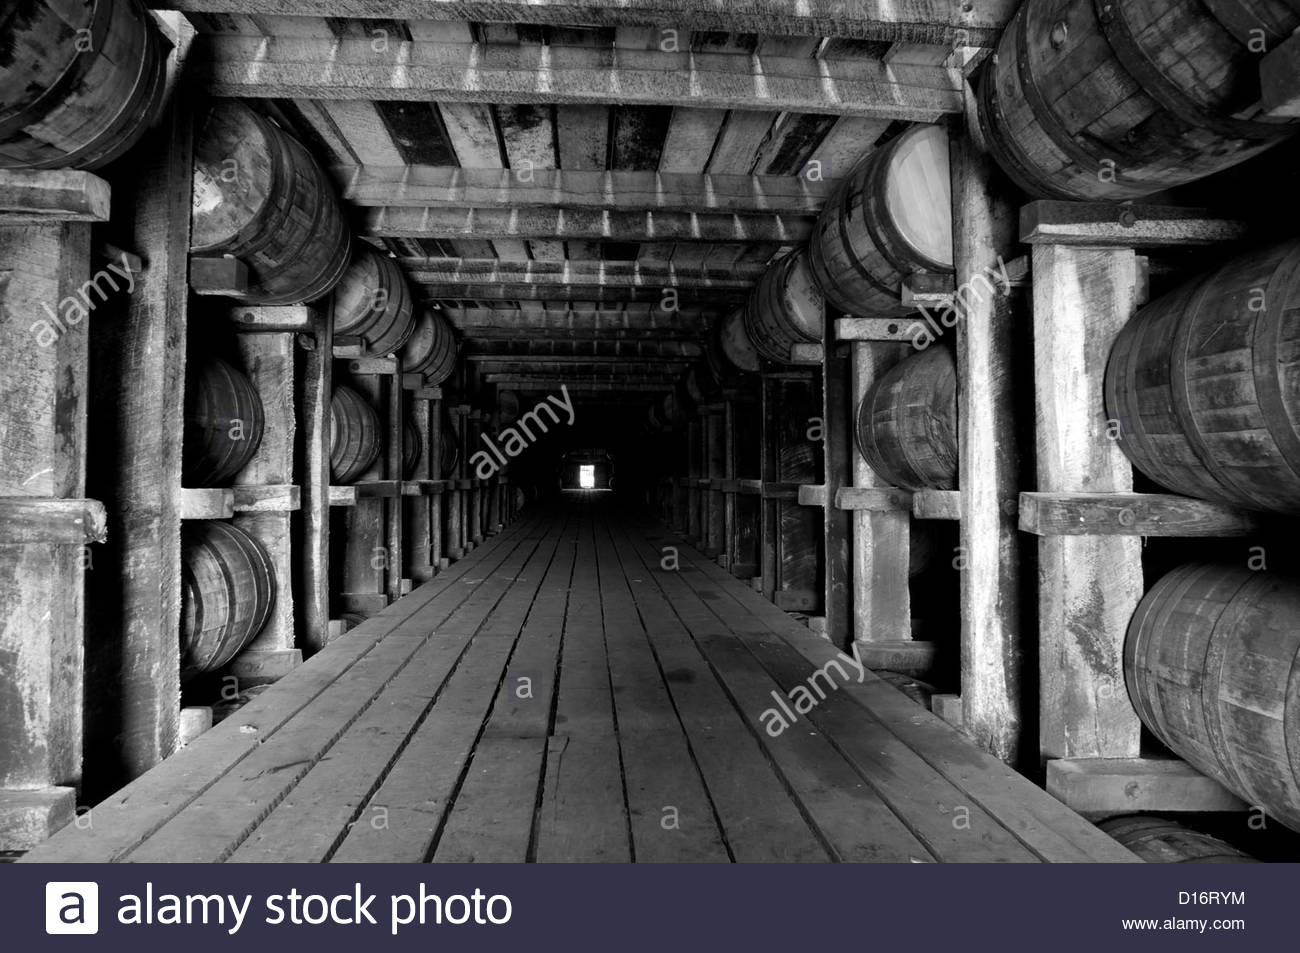 19 Popular Moore Hardwood Floors Lexington Ky 2024 free download moore hardwood floors lexington ky of bardstown ky stock photos bardstown ky stock images alamy pertaining to 1792 ridgemont reserve bourbon at the tom moore distillery in bardstown ky stock